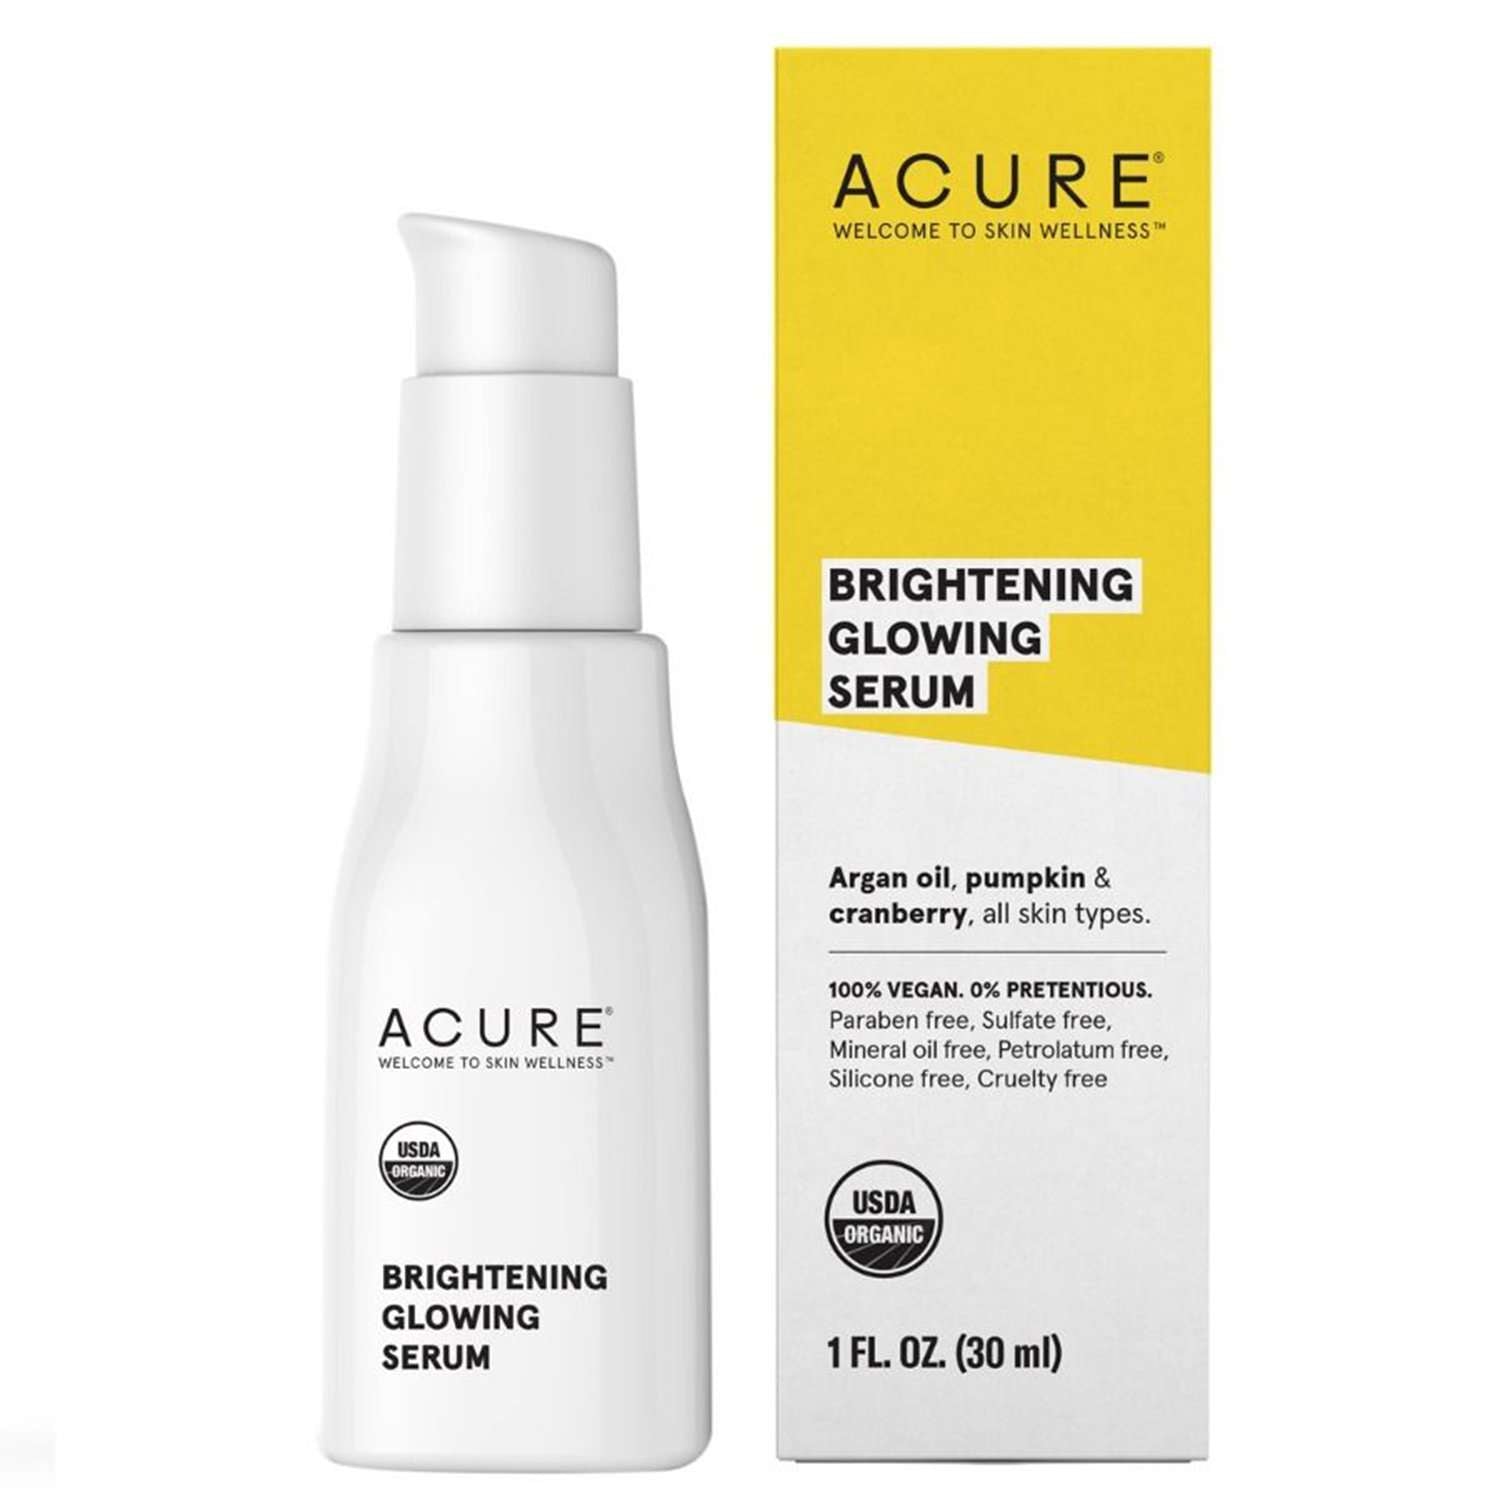 ACURE® Brightening Glowing Serum at Socialite Beauty Canada